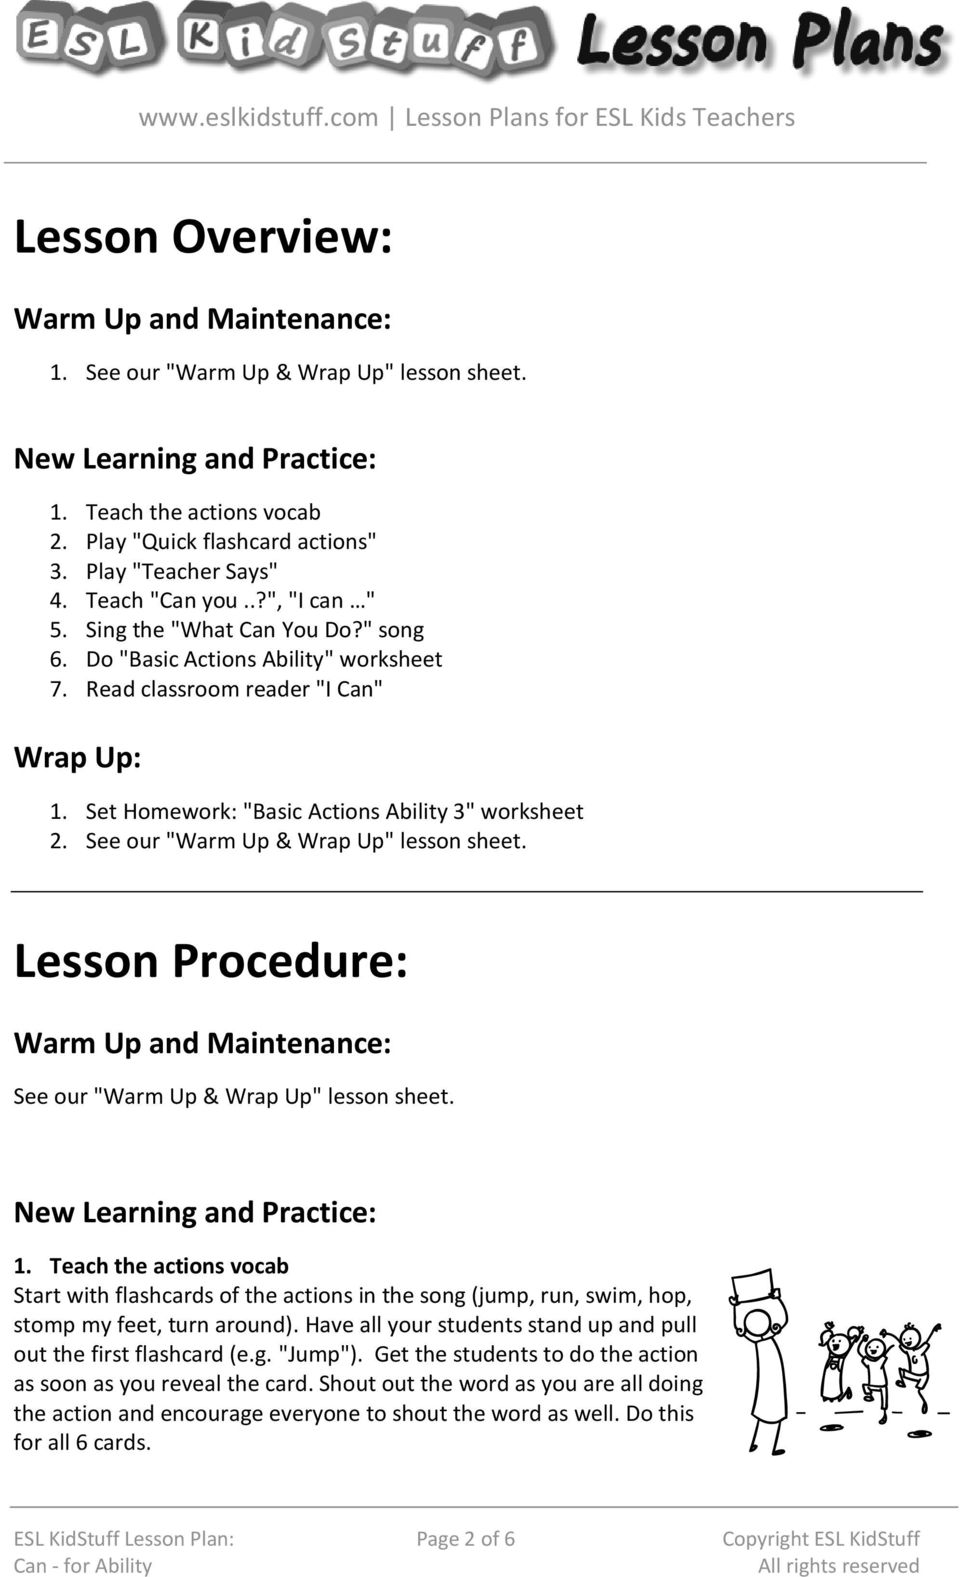 Set Homework: "Basic Actions Ability 3" worksheet 2. See our "Warm Up & Wrap Up" lesson sheet. Lesson Procedure: Warm Up and Maintenance: See our "Warm Up & Wrap Up" lesson sheet.